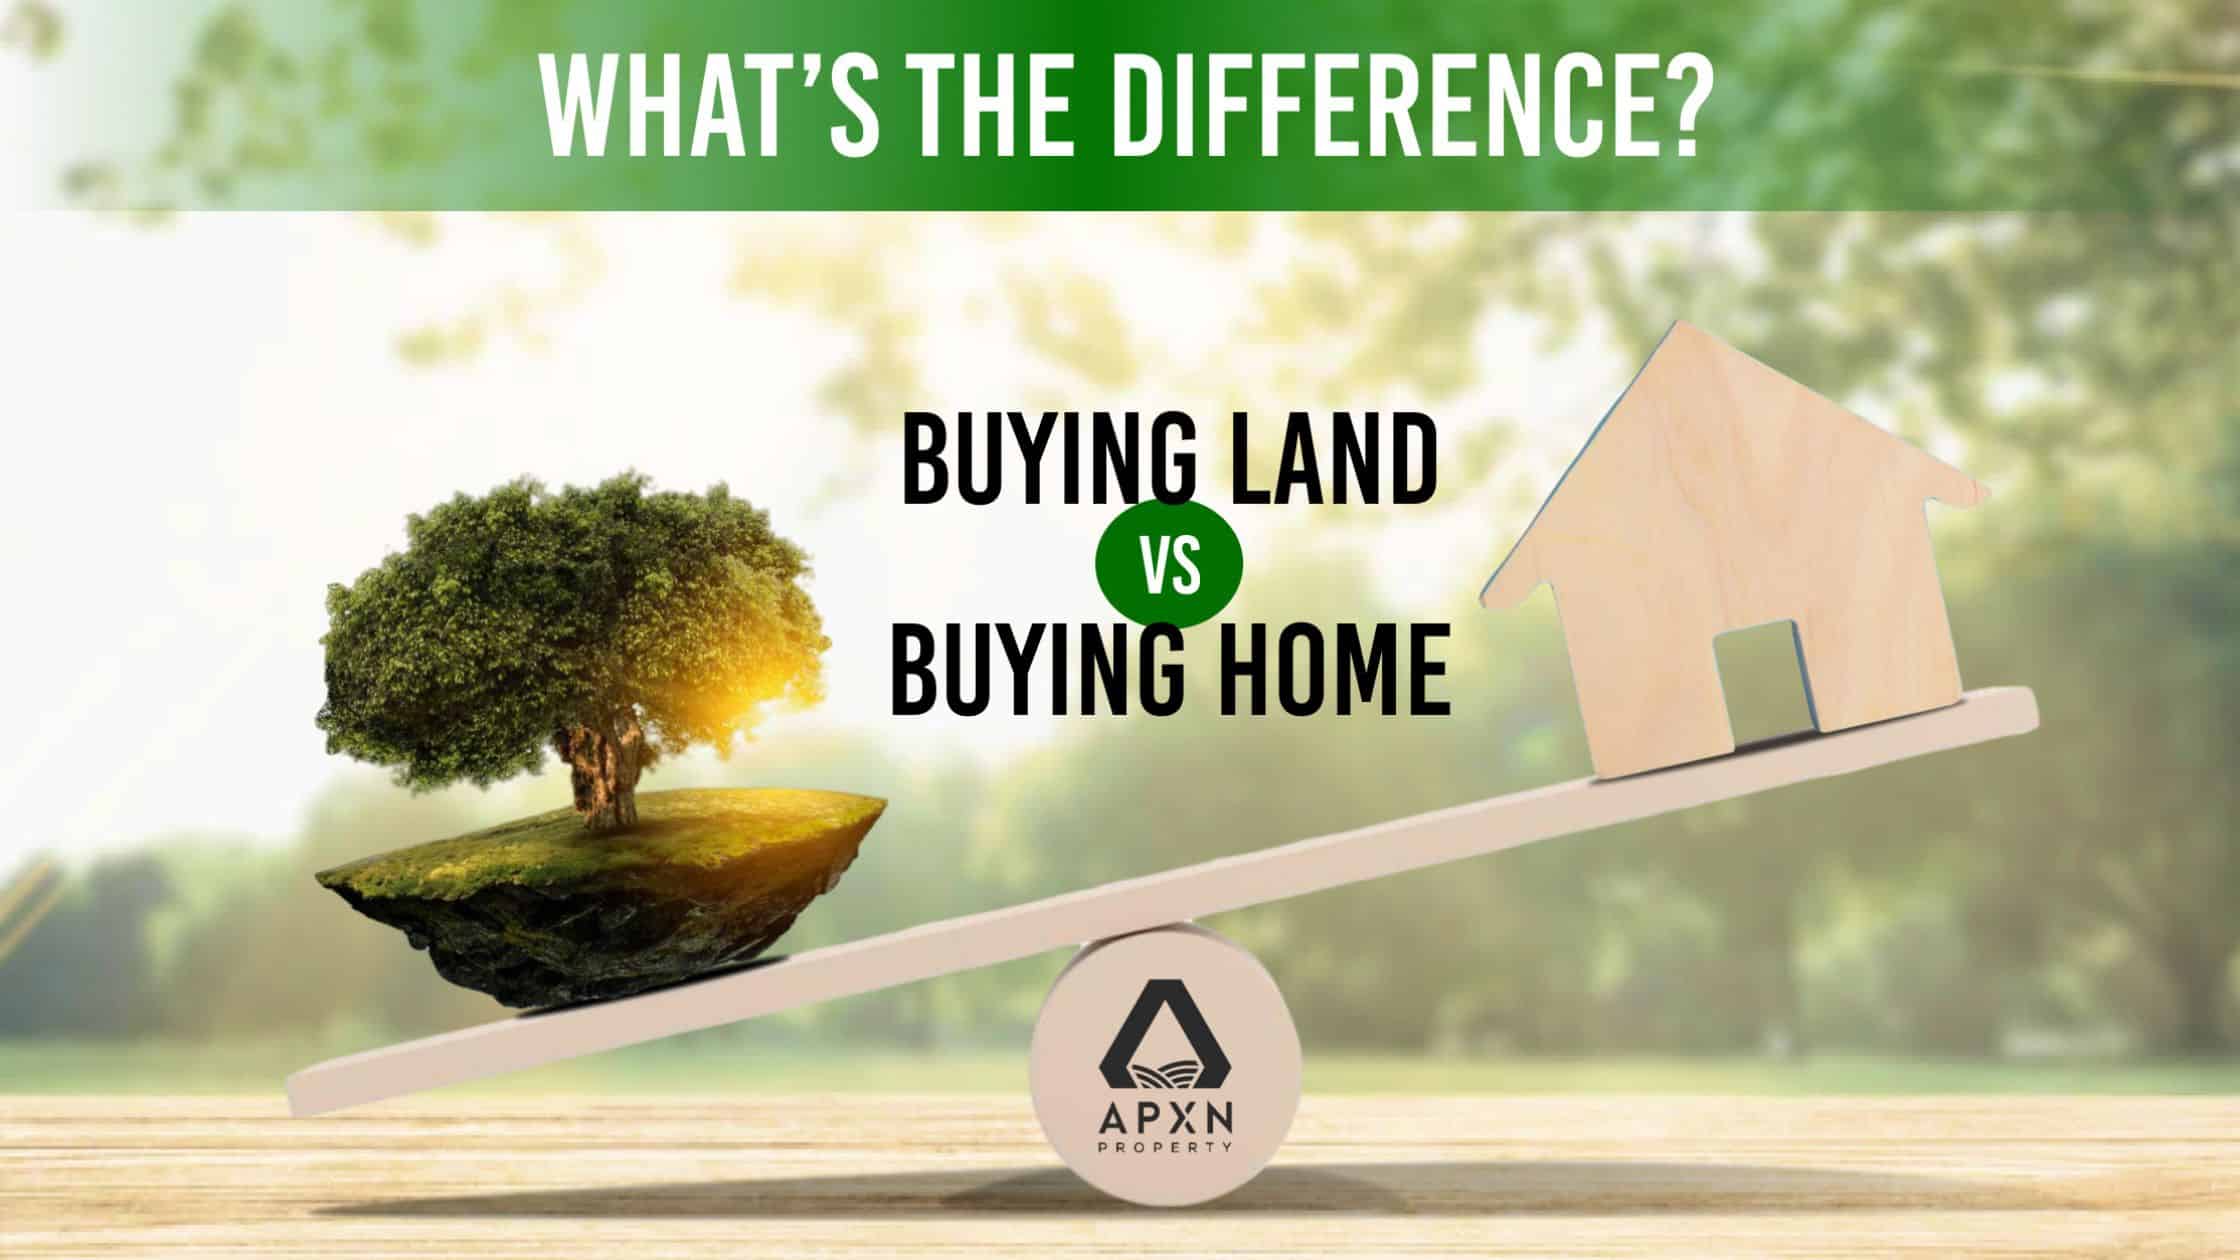 Why Buying Land is Different from Buying a Home